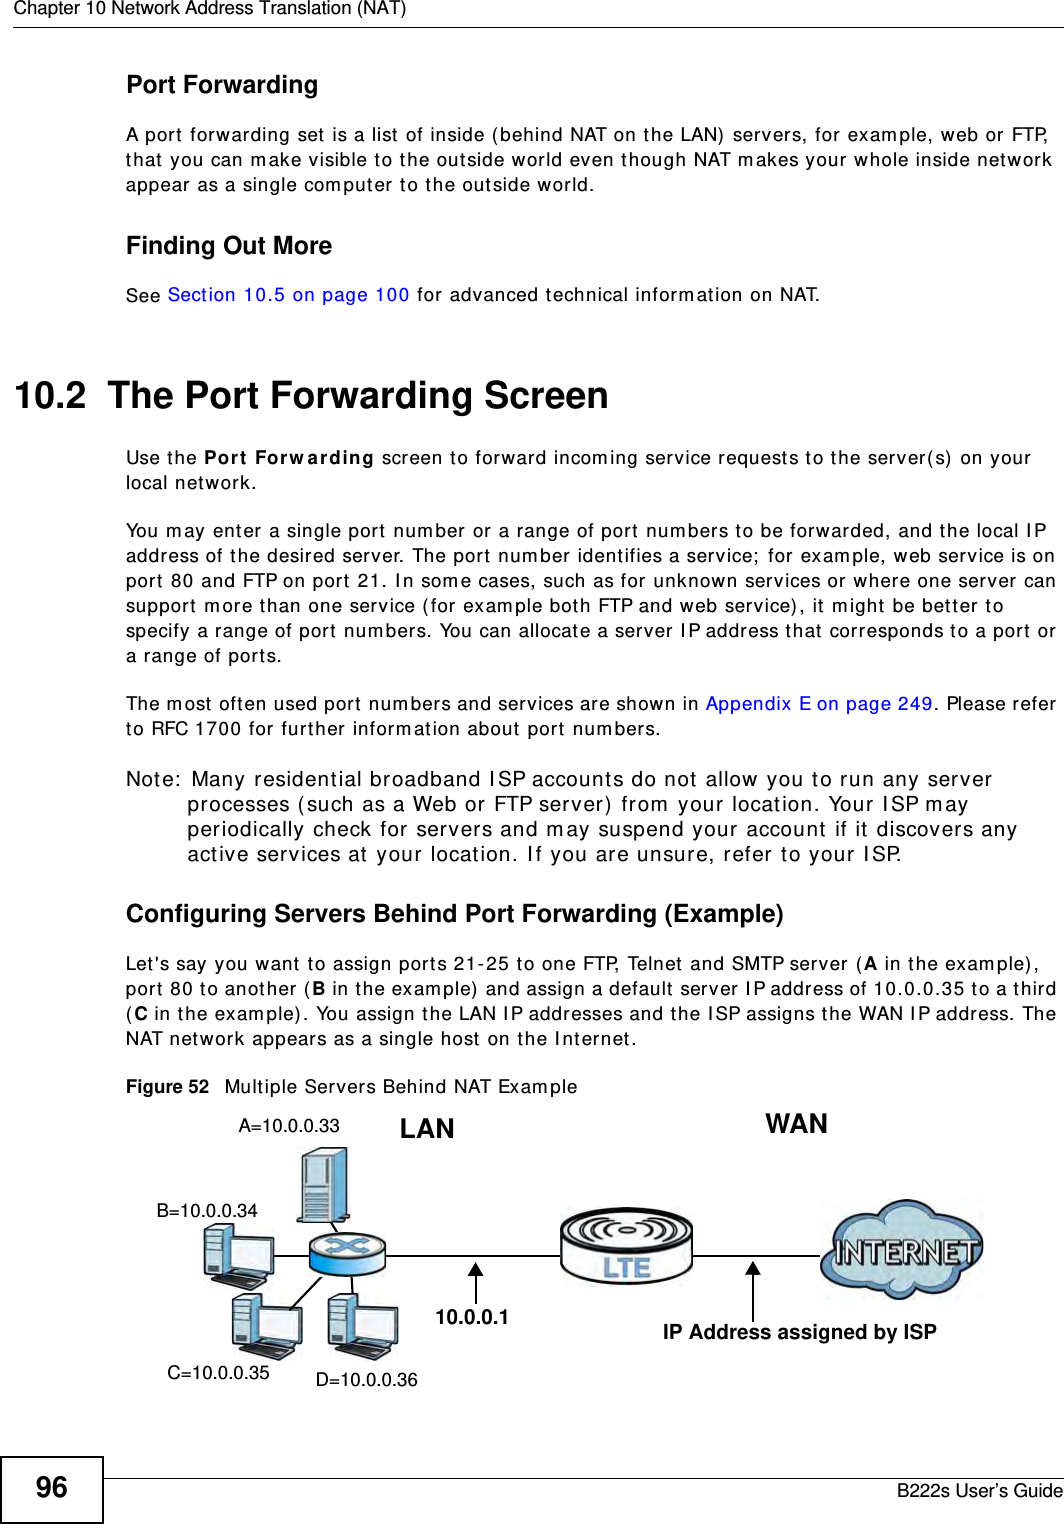 Chapter 10 Network Address Translation (NAT)B222s User’s Guide96Port ForwardingA port  forwarding set is a list of inside (behind NAT on t he LAN)  servers, for exam ple, web or FTP, that  you can m ake visible to t he out side w orld even though NAT m akes your whole inside network appear as a single com put er to t he out side wor ld.Finding Out MoreSee Sect ion 10.5 on page 100 for advanced technical inform at ion on NAT.10.2  The Port Forwarding Screen Use t he Port For w arding screen to forward incom ing service requests t o t he server( s) on your local net work.You m ay ent er a single port  num ber or a range of port  num bers t o be forwarded, and t he local I P address of the desired server. The port  num ber identifies a service;  for exam ple, web service is on port  80 and FTP on port  21. I n som e cases, such as for unknown ser vices or where one server can support  m ore t han one service ( for exam ple bot h FTP and web service) , it m ight  be bett er to specify a range of port  num bers. You can allocate a server I P address t hat  corresponds t o a port or a range of port s.The m ost  oft en used port num bers and services are shown in Appendix E on page 249. Please refer to RFC 1700 for furt her inform ation about  port  num bers. Note:  Many resident ial broadband I SP account s do not allow you t o run any server processes ( such as a Web or FTP server)  from  your locat ion. Your I SP m ay periodically check for servers and m ay suspend your account  if it  discovers any act ive services at  your locat ion. I f you ar e unsure, r efer t o your I SP.Configuring Servers Behind Port Forwarding (Example)Let&apos;s say you want  t o assign port s 21- 25 t o one FTP, Telnet and SMTP server (A in t he exam ple) , port  80 t o another ( B in t he exam ple) and assign a default  server I P address of 10.0.0.35 to a t hird (C in the exam ple) . You assign t he LAN I P addr esses and t he I SP assigns t he WAN I P address. The NAT net work appears as a single host on t he I nt er net .Figure 52   Mult iple Servers Behind NAT Exam pleA=10.0.0.33D=10.0.0.36C=10.0.0.35B=10.0.0.34WANLAN10.0.0.1 IP Address assigned by ISP